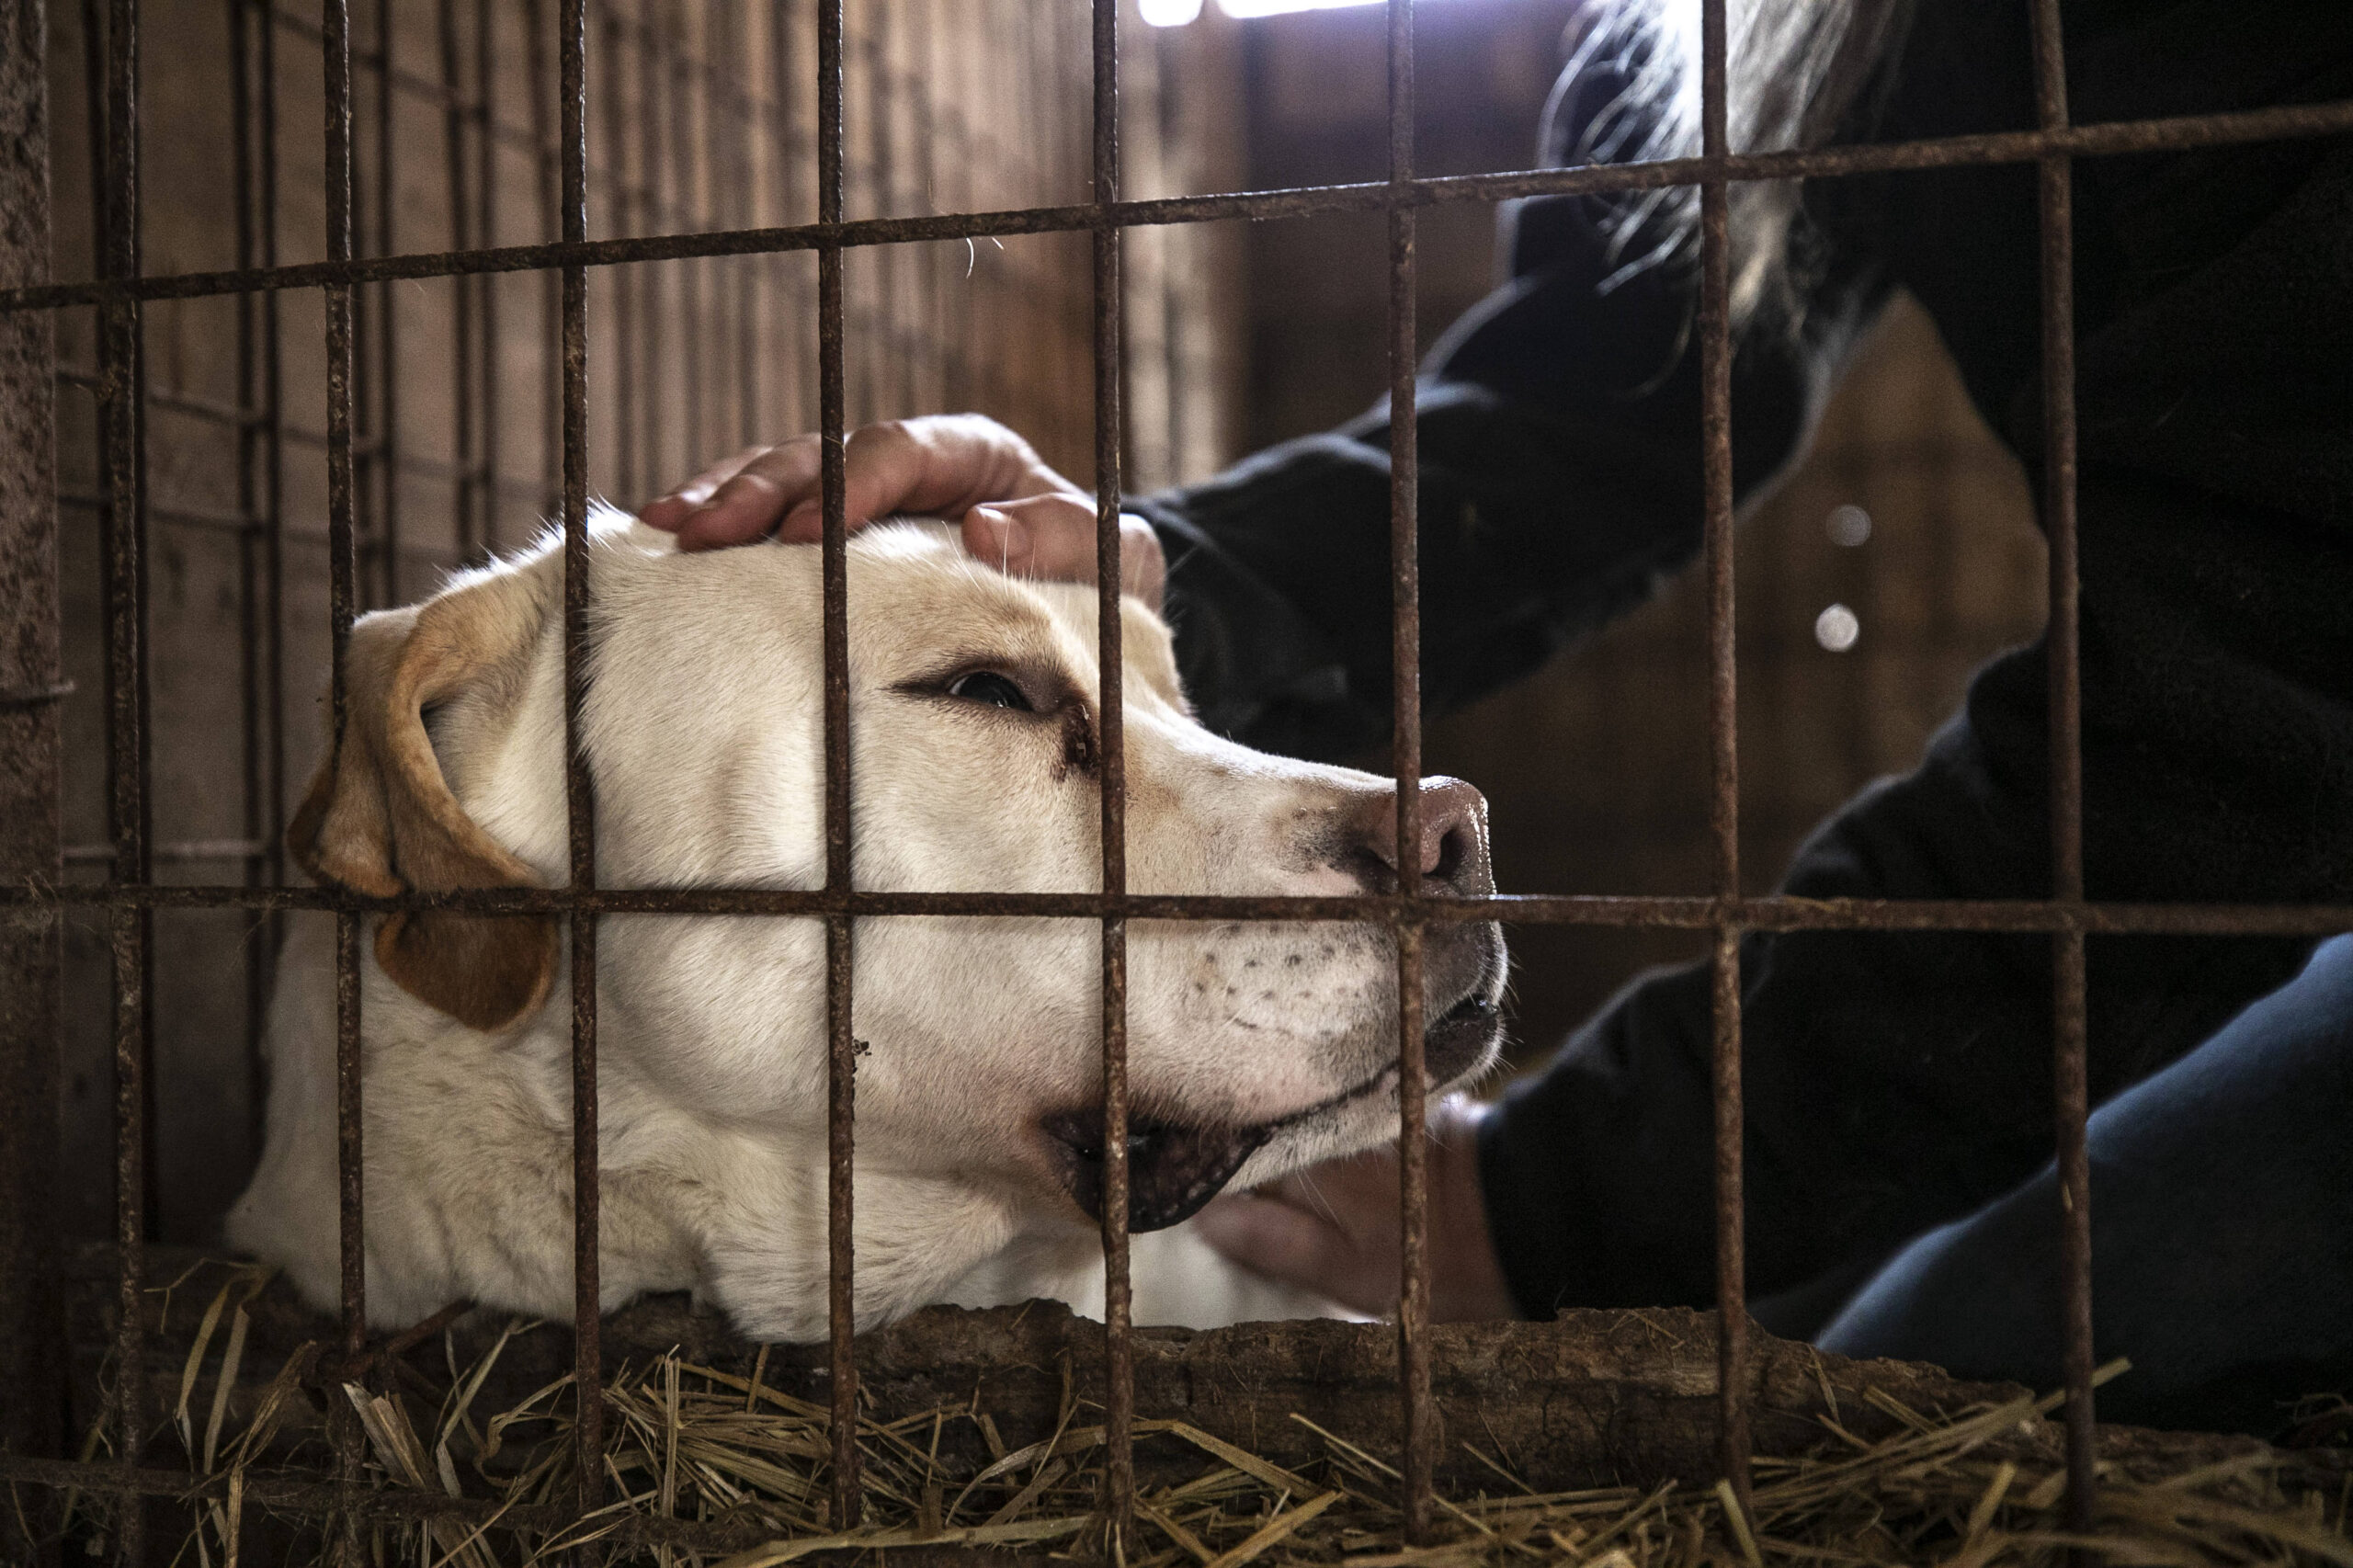 South Korean dog meat farmers push back against growing moves to outlaw their industry